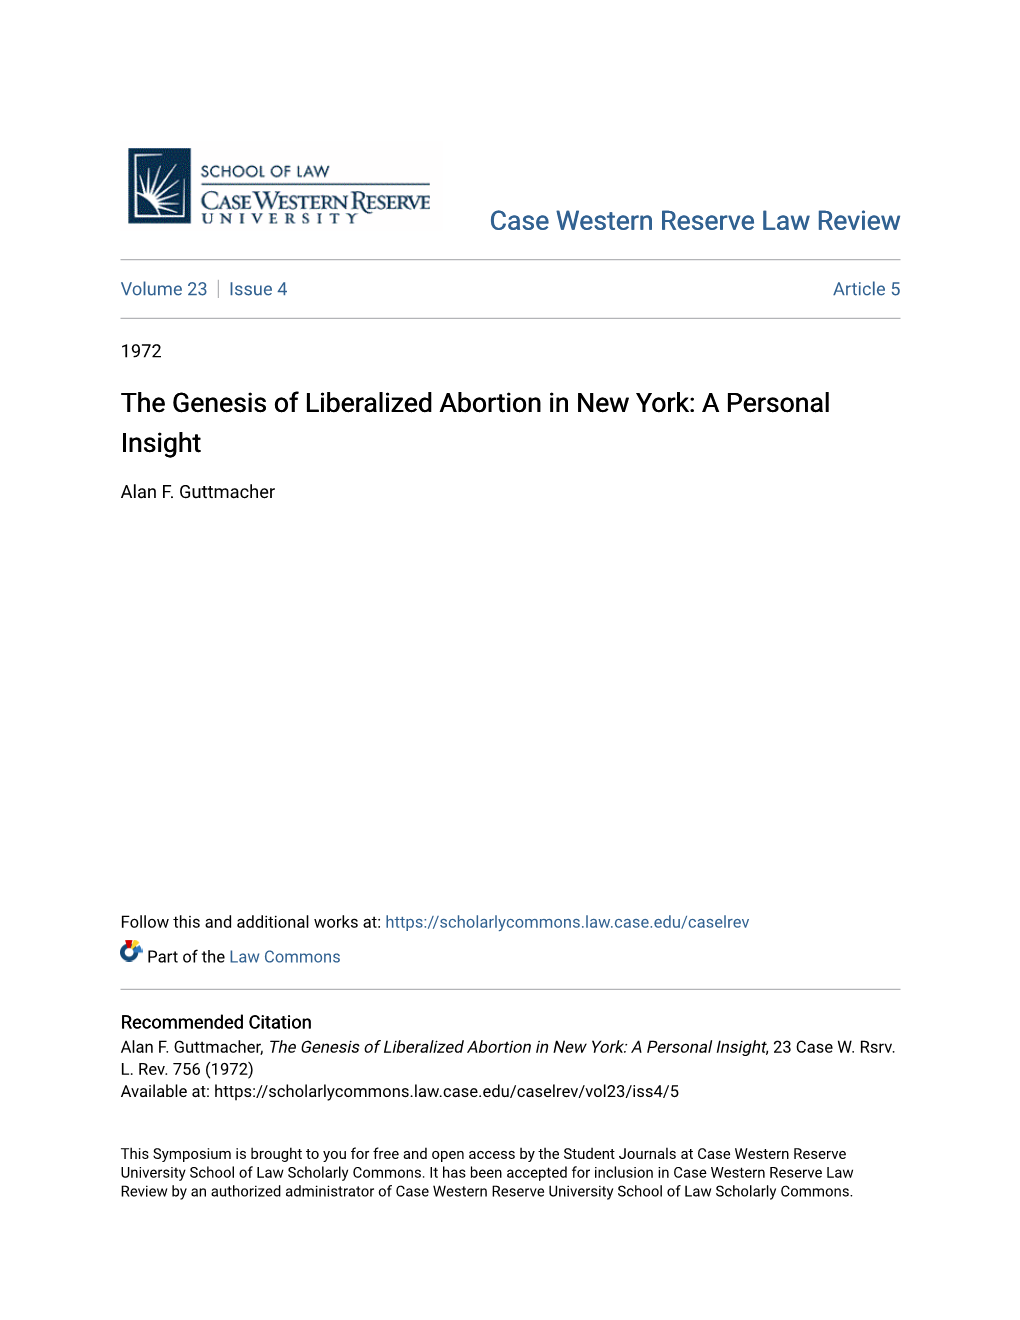 The Genesis of Liberalized Abortion in New York: a Personal Insight